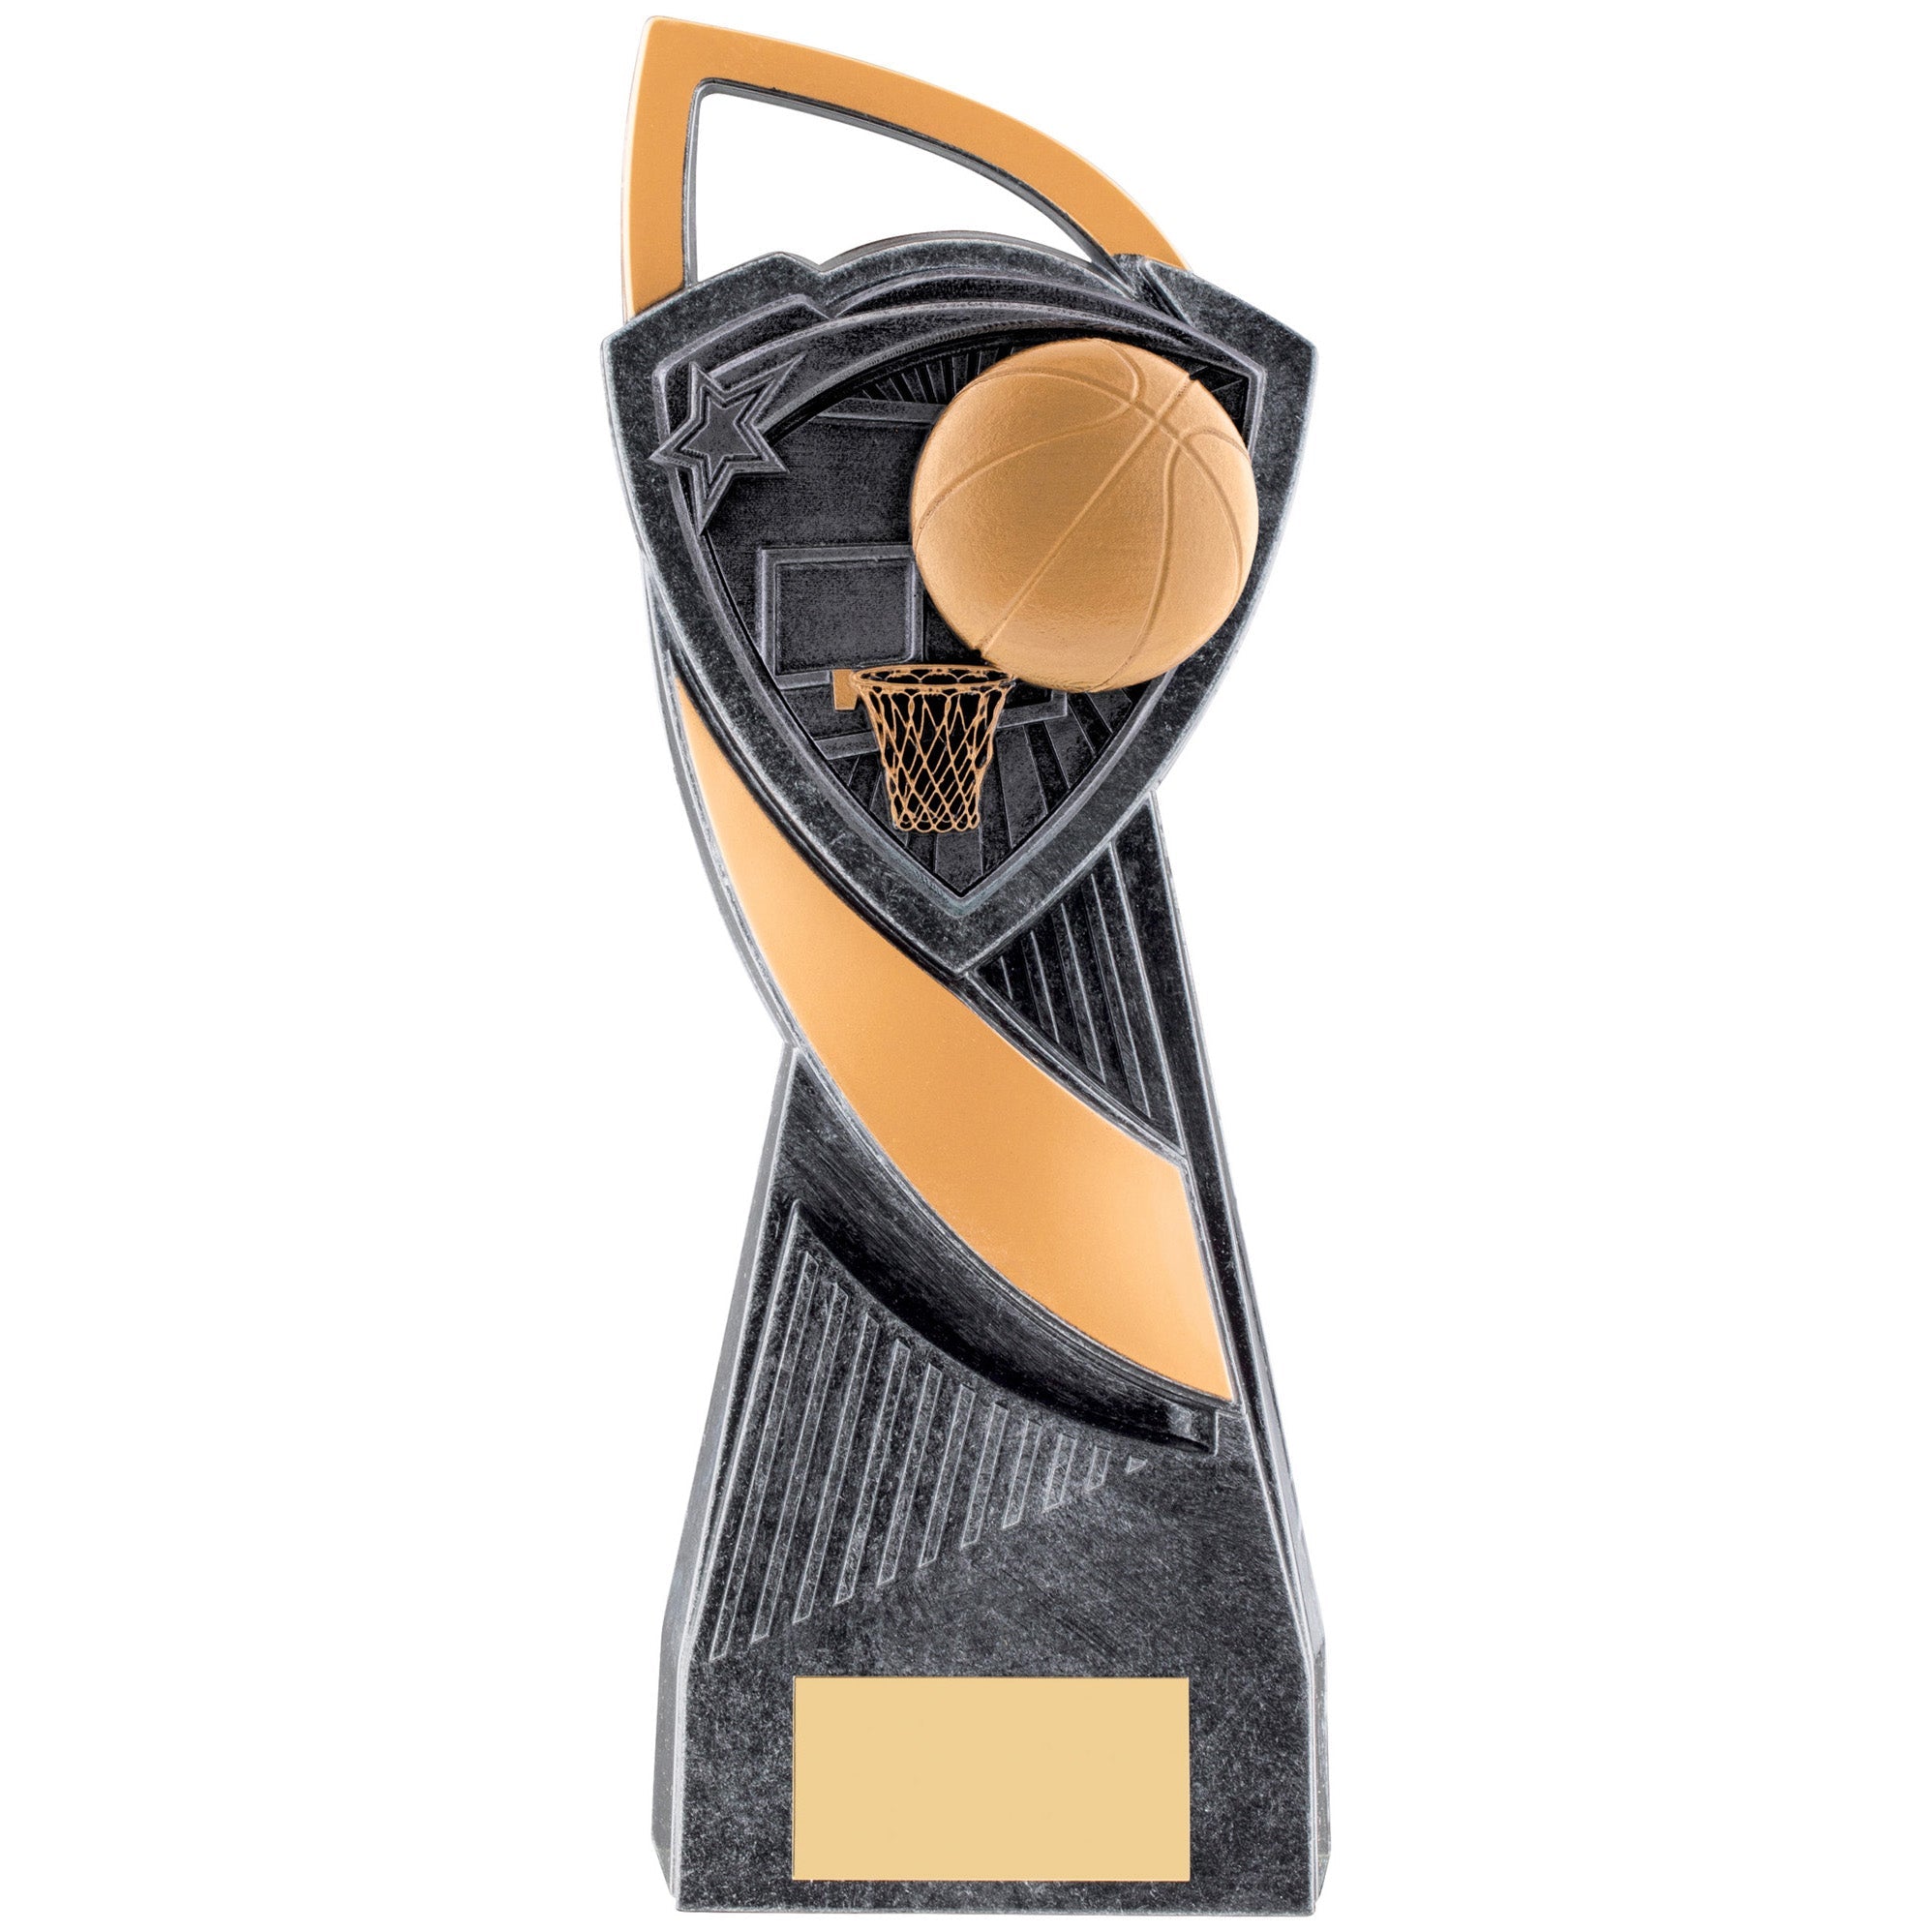 Gold/Silver Utopia Basketball Trophy (Gold/Silver)